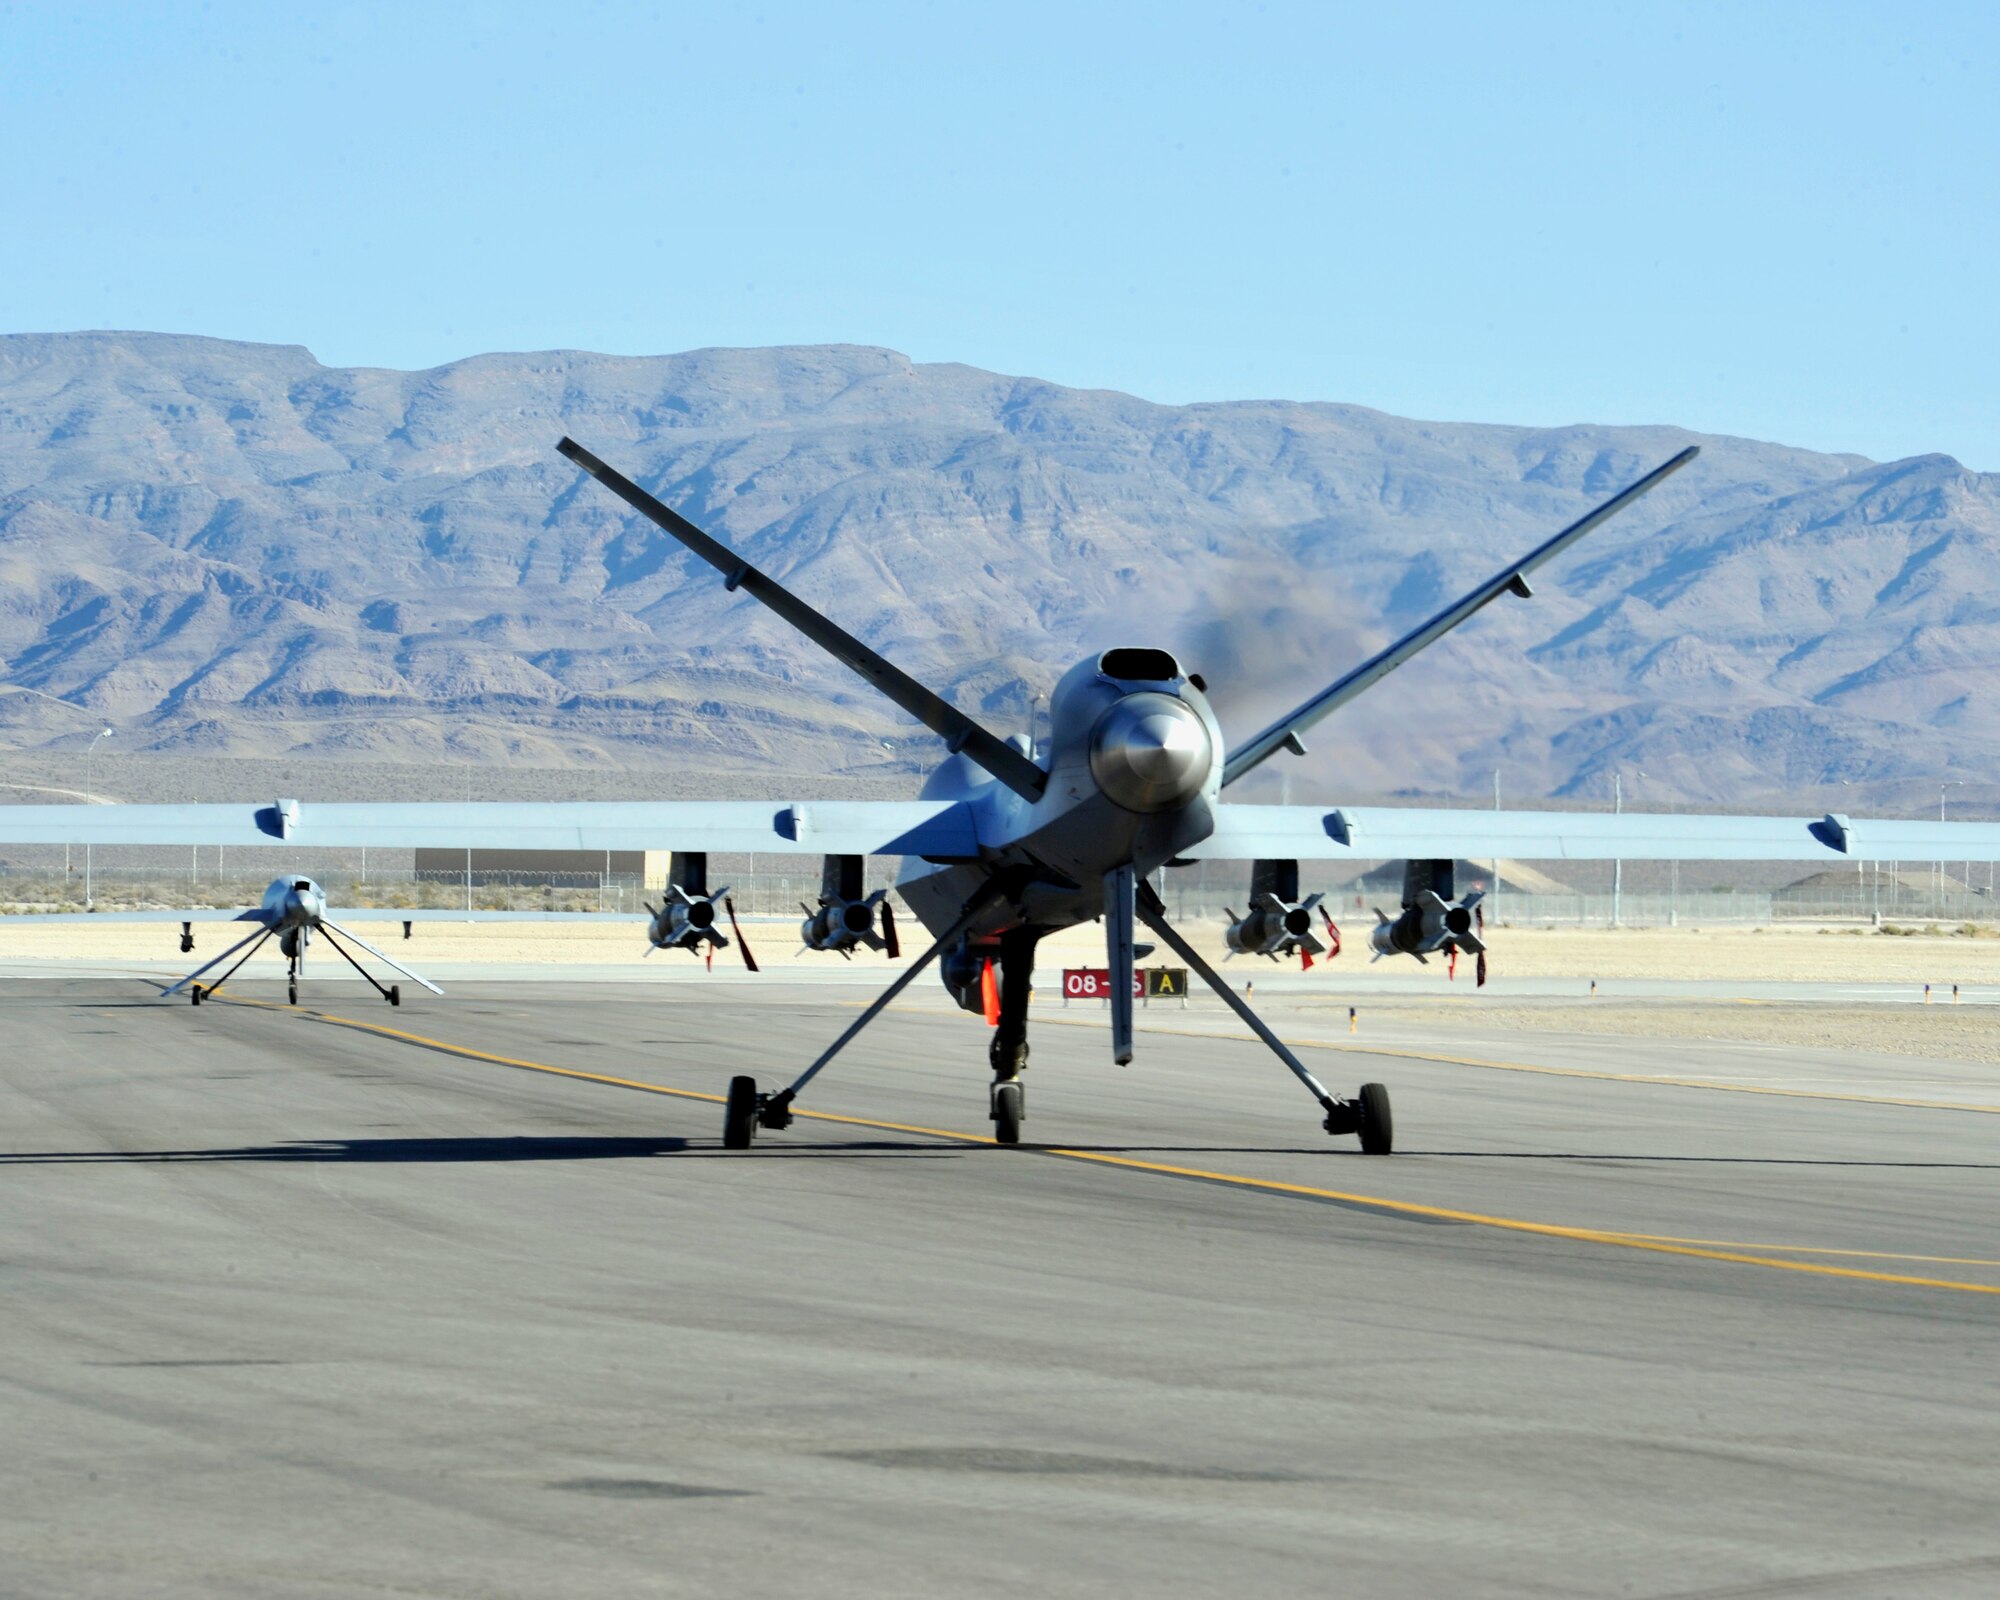 CREECH AIR FORCE BASE, Nev. – An MQ-1 Predator and MQ-9 Reaper prepare for takeoff on the Creech Air Force Base, Nev., flightline July 18, 2013. Both aircraft are armed, multi-mission, medium-altitude, long-endurance remotely piloted aircraft that are employed primarily as intelligence-collection asset and secondarily against dynamic execution targets. 
